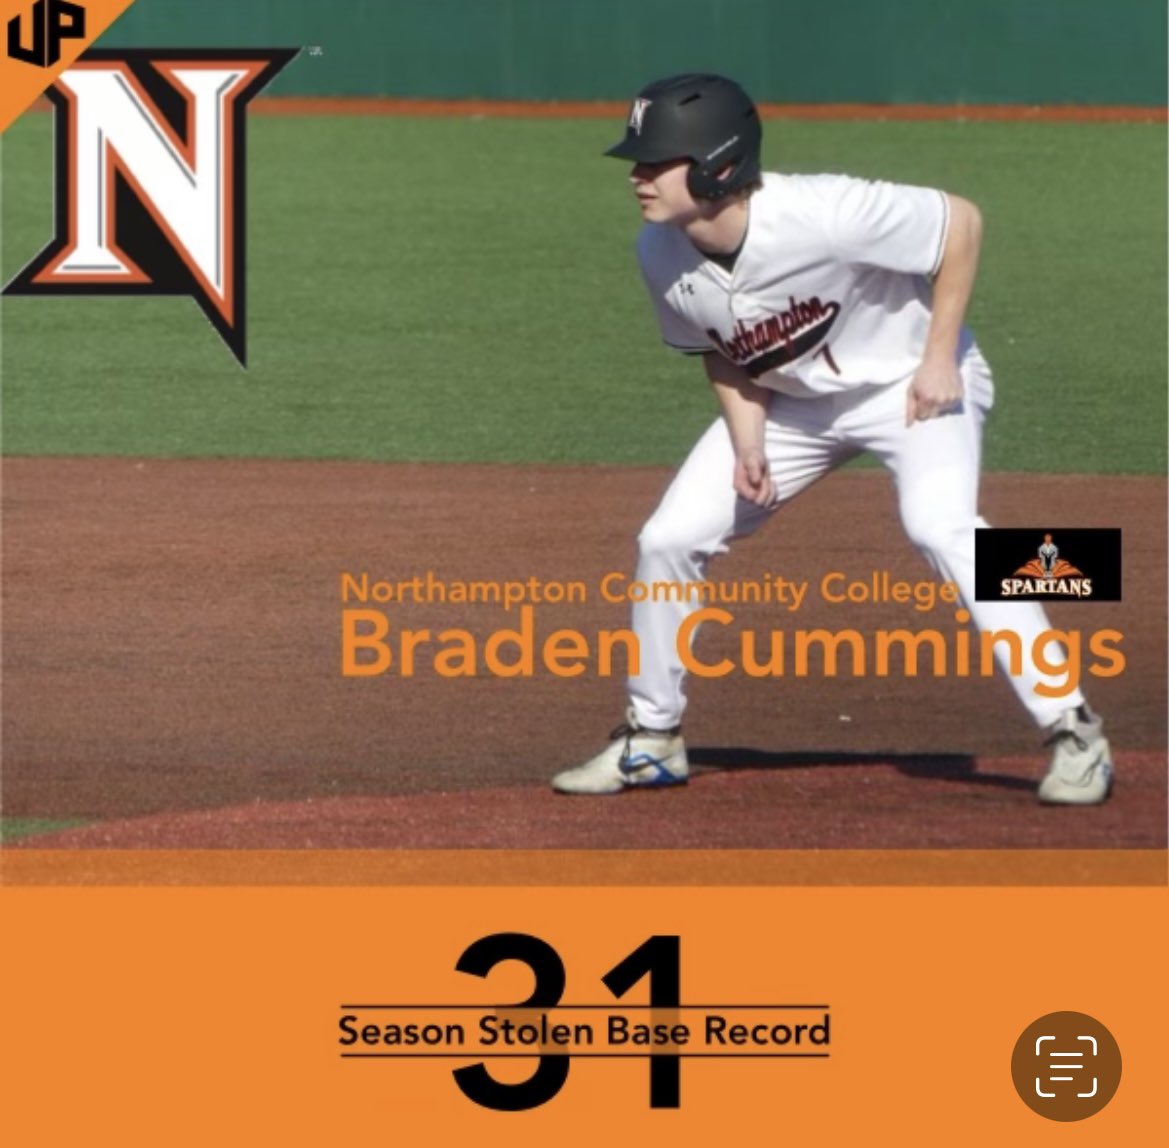 Congrats to RHP Austin Beard and OF Braden Cummings on Record Breaking efforts this weekend! Beard is a our new Single Season Strikeouts record holder with 73 and counting.. Cummings owns the Single Season Stolen Base record with 33 and more to get! Congrats Guys! #SwordsUp⚔️